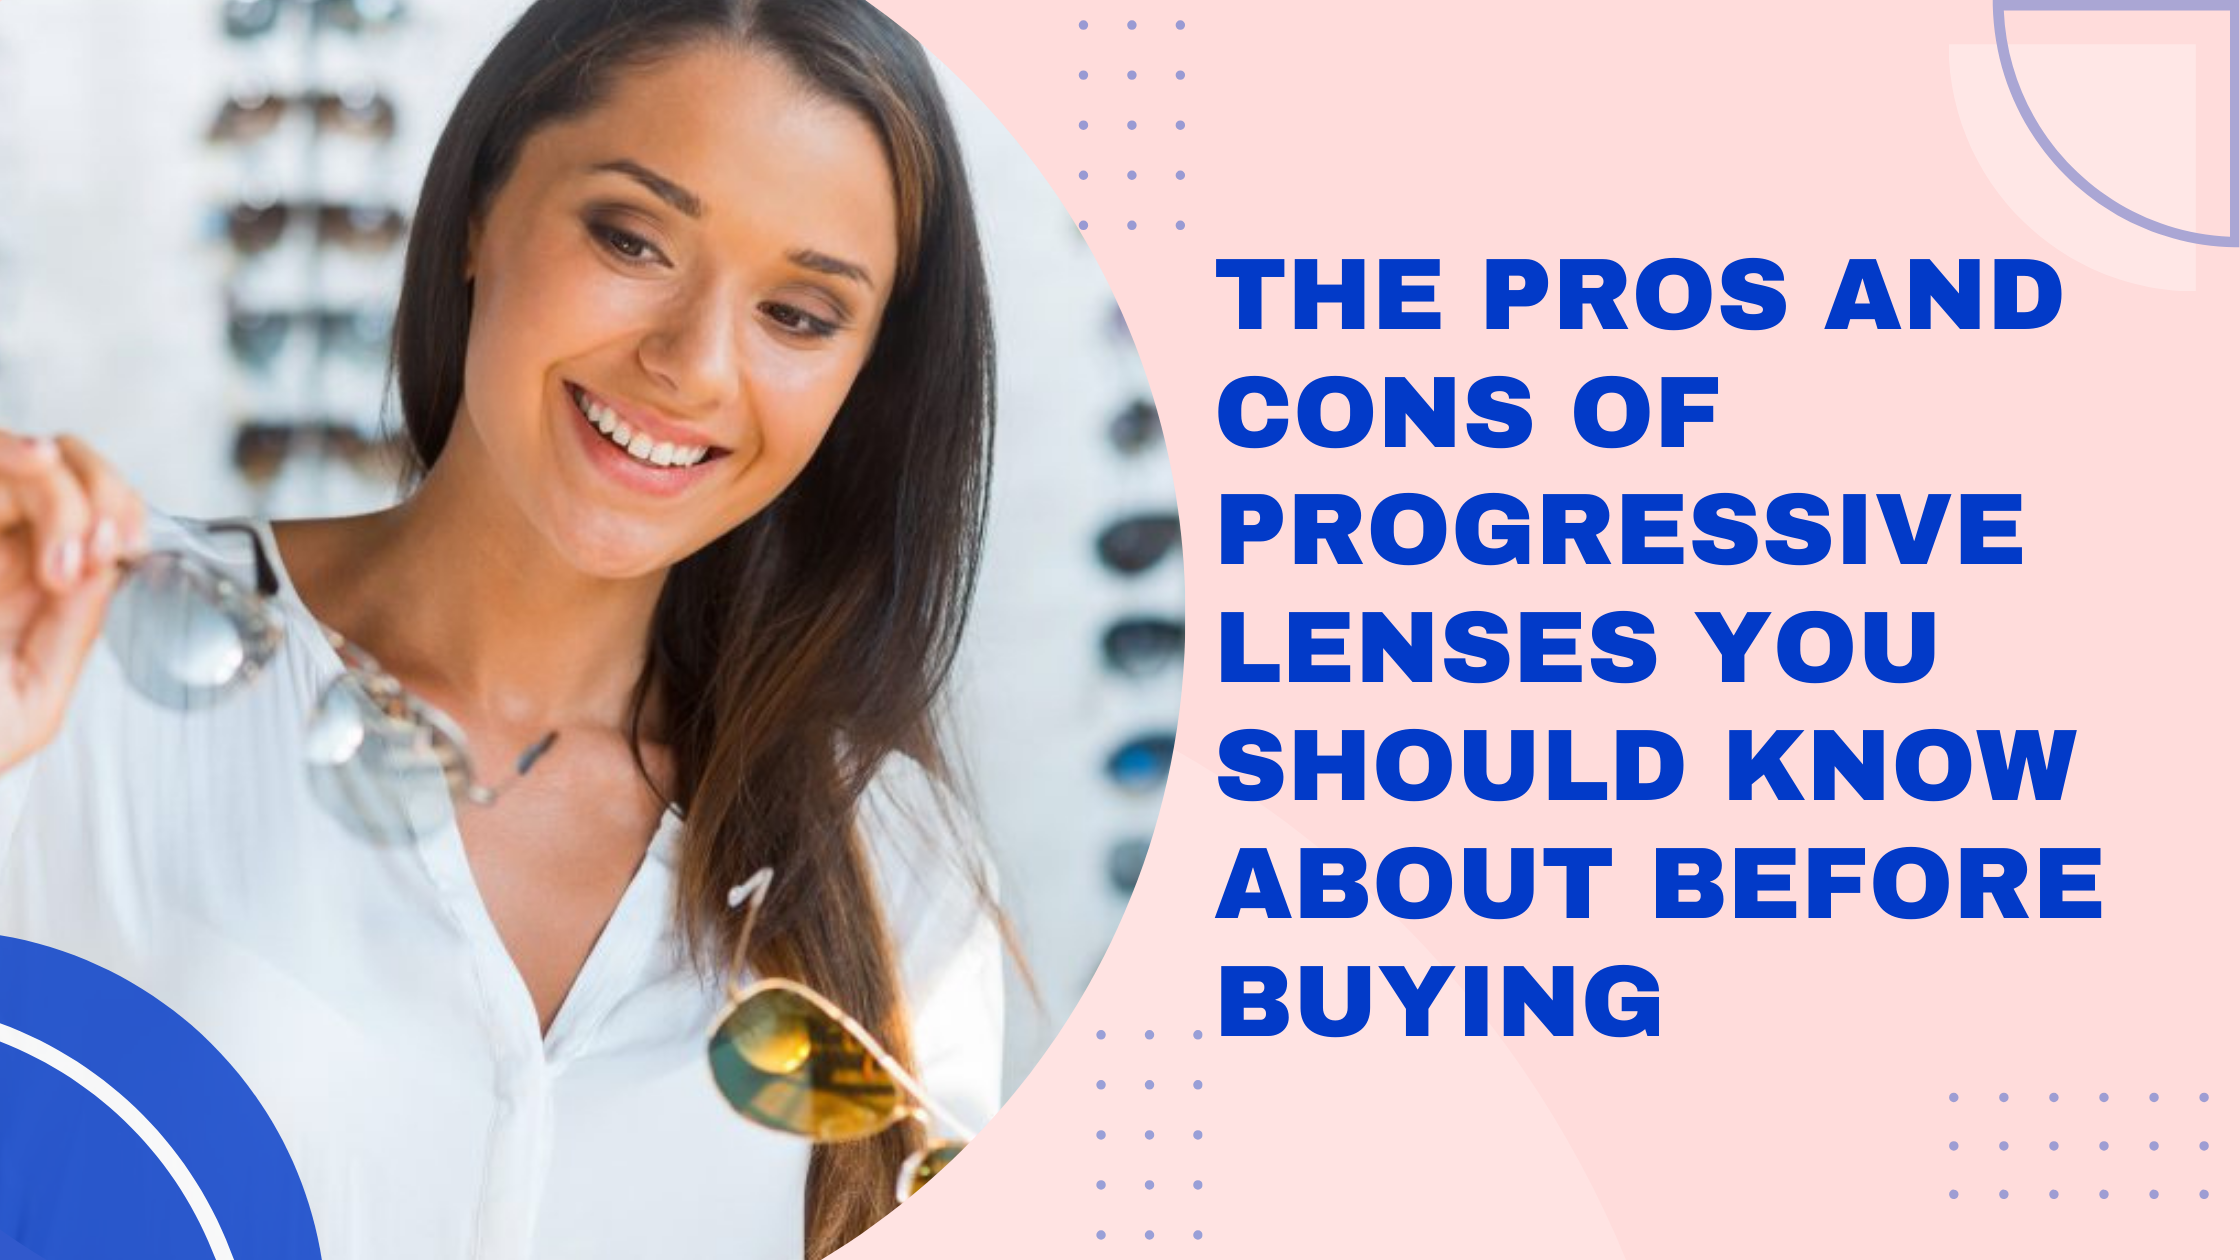 The Pros and Cons of Progressive Lenses You Should Know About Before Buying